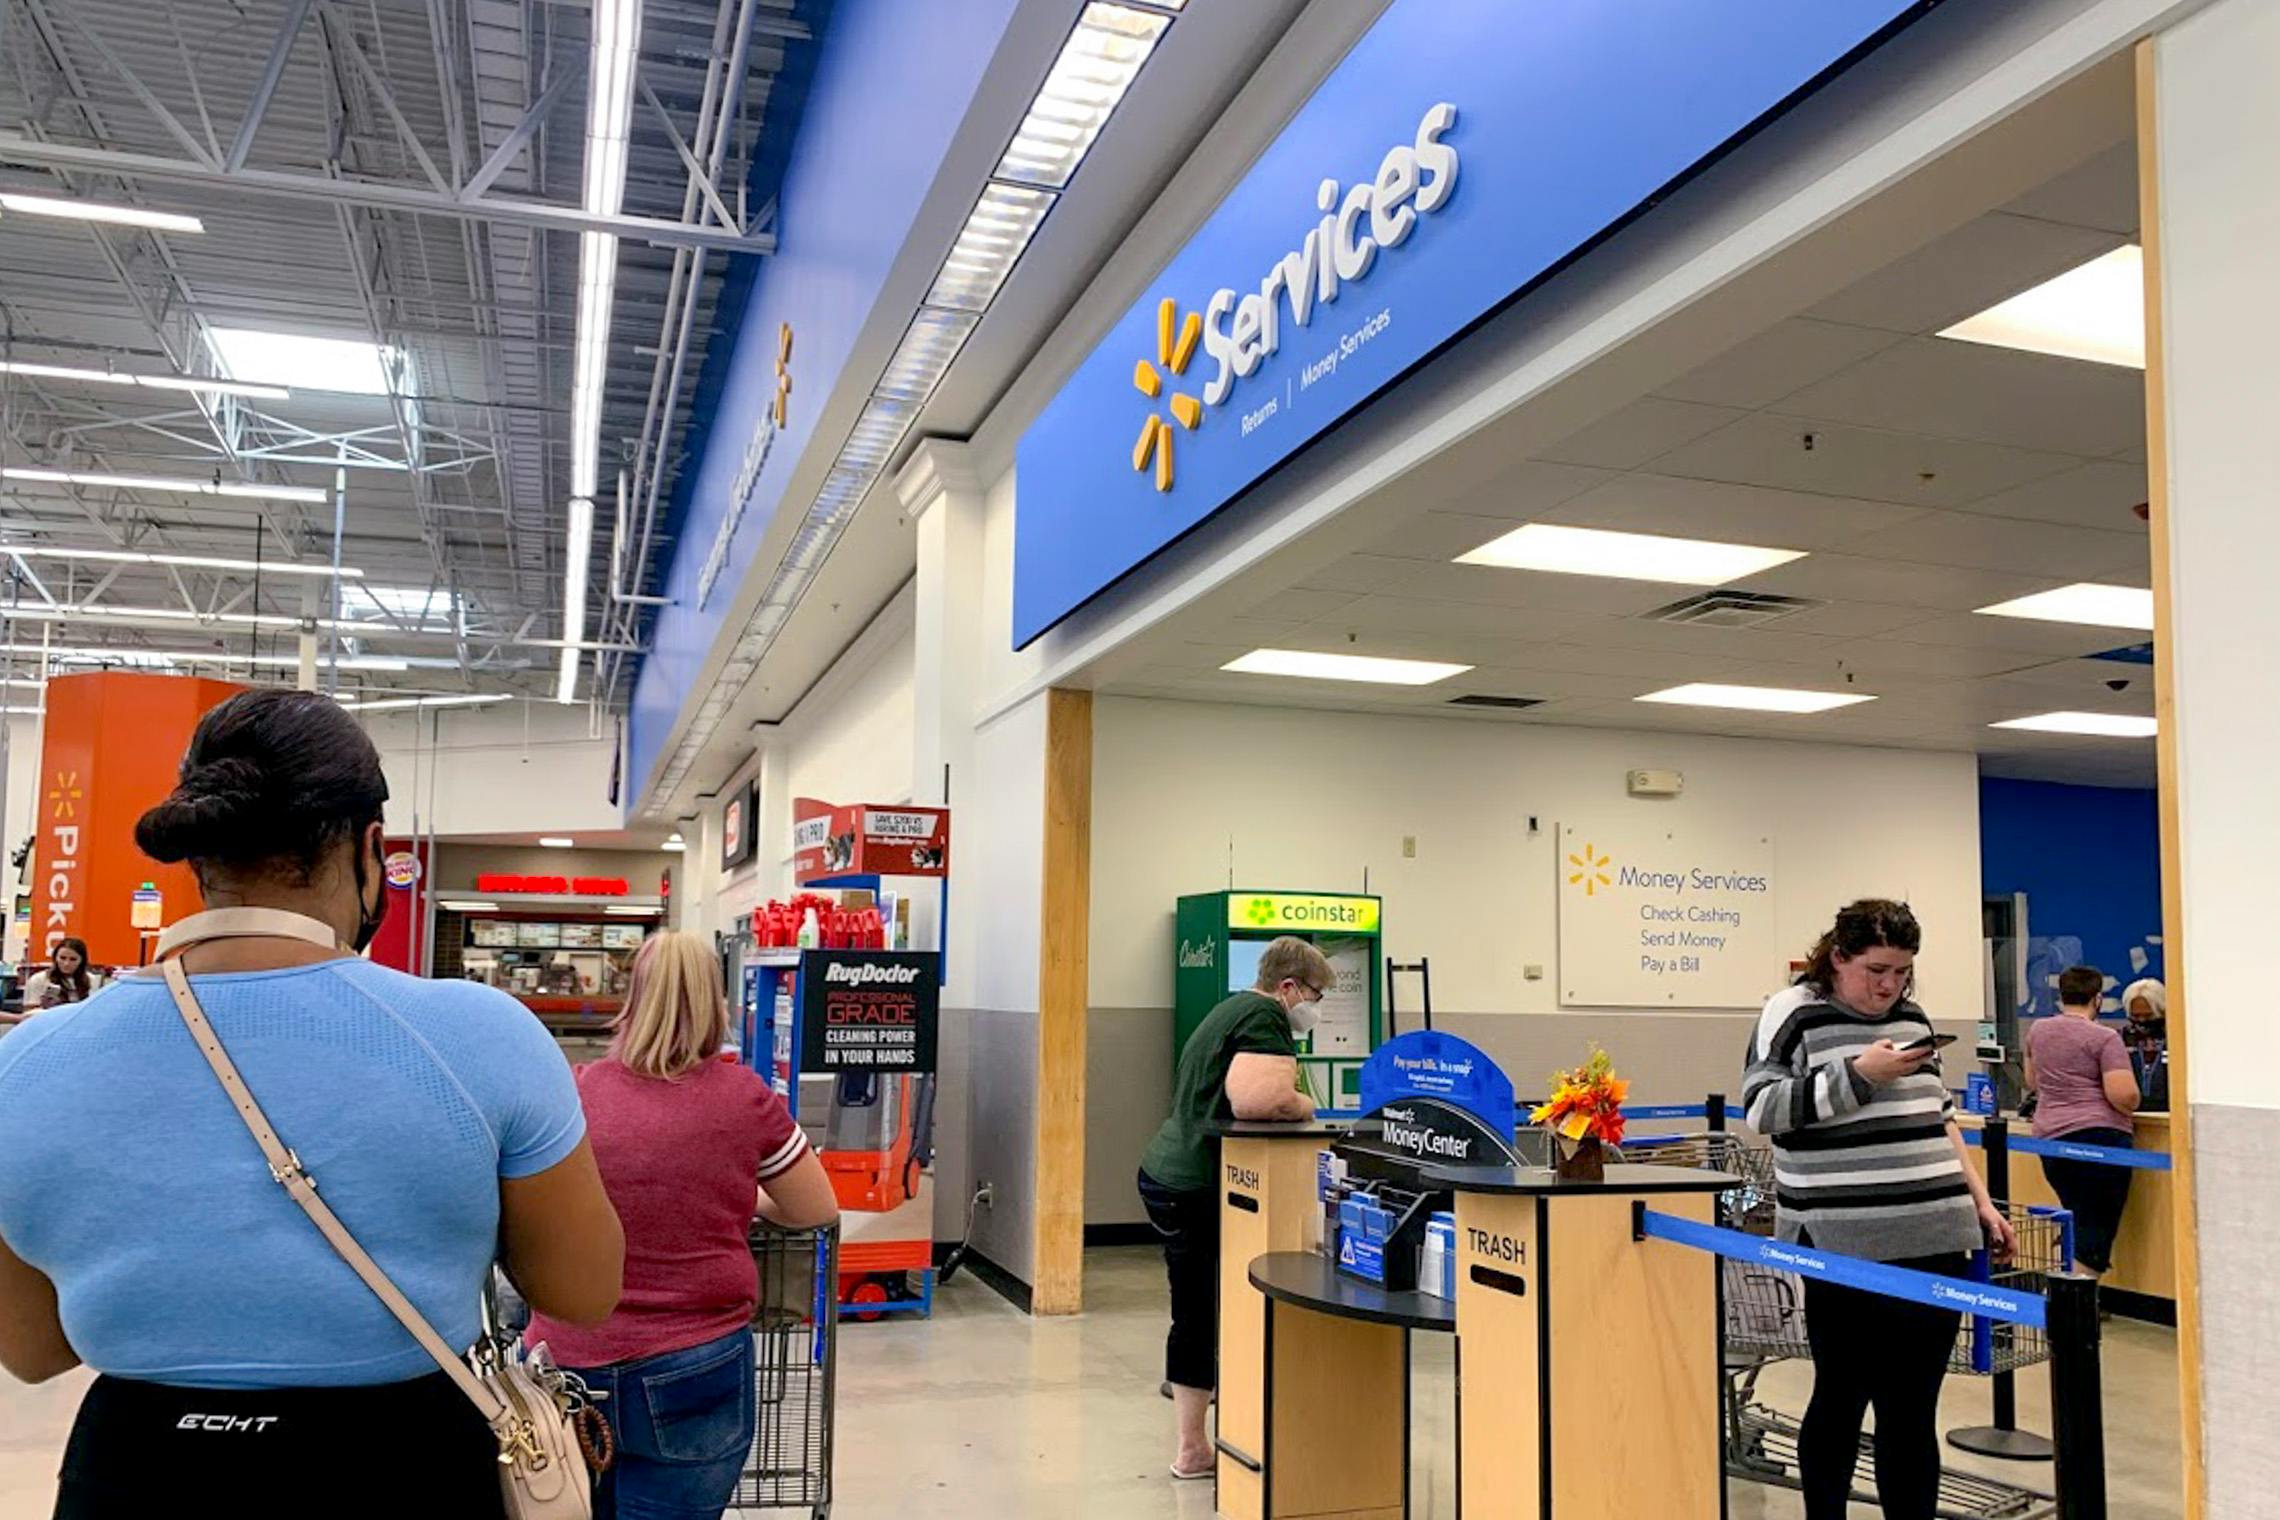 People standing in line for the Services desk in Walmart to return items.